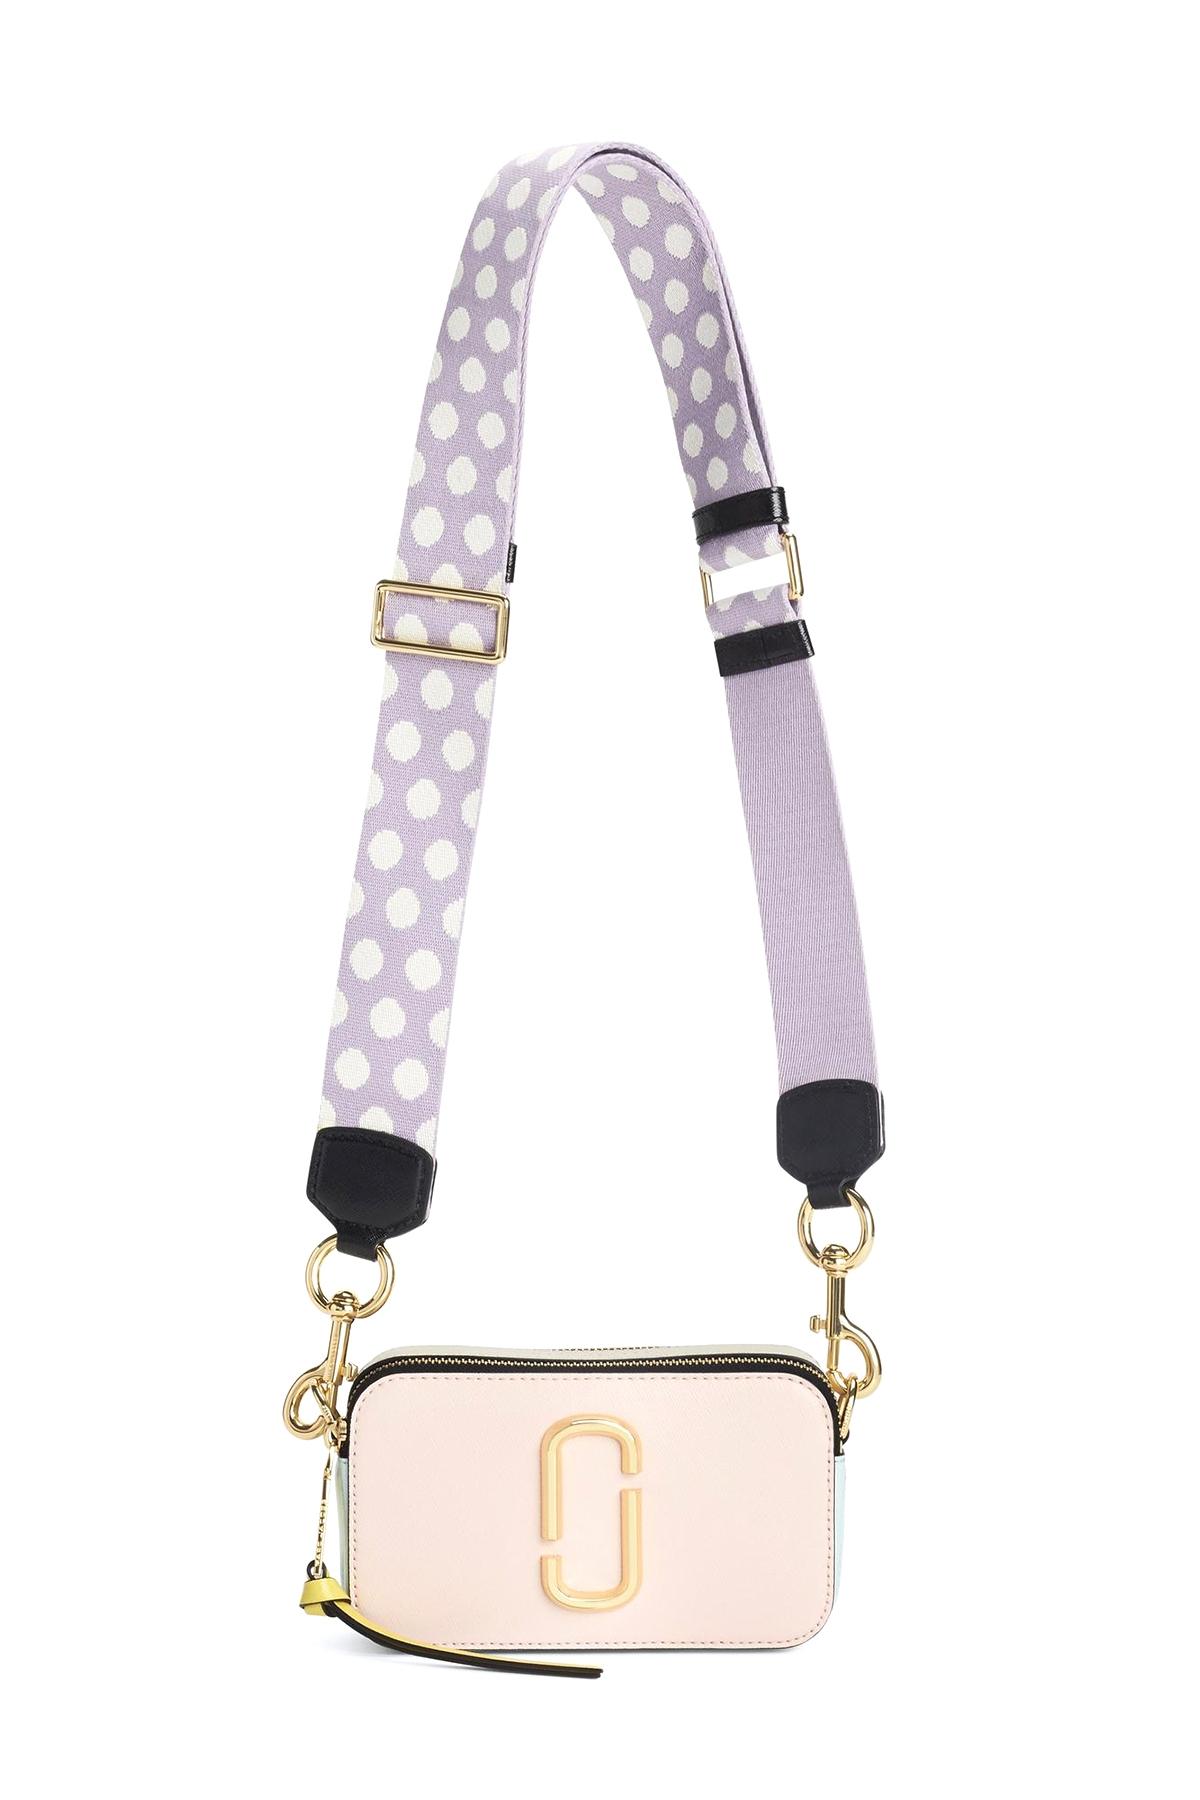 Marc Jacobs Leather Snapshot Bag In Blush Multi in Pink | Lyst